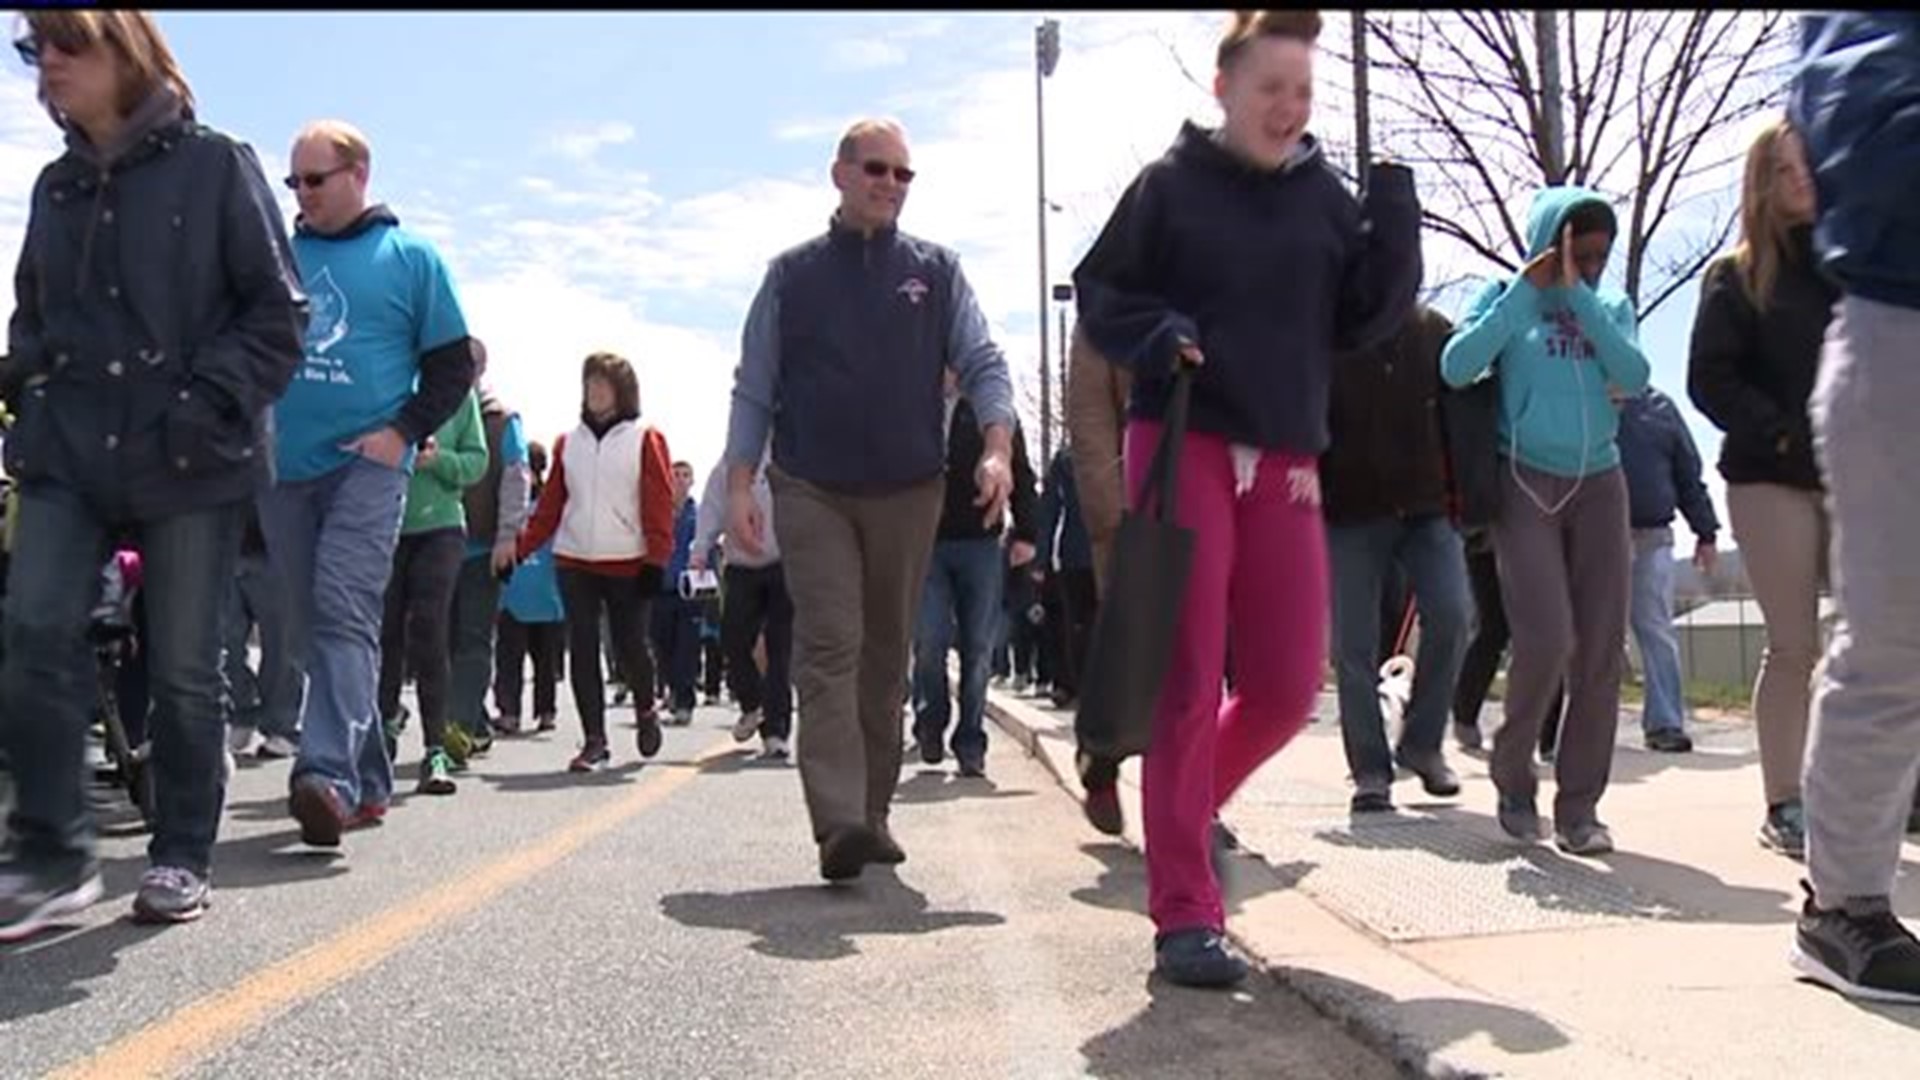 Students organize walk to raise money and awareness for clean water in impoverished countries